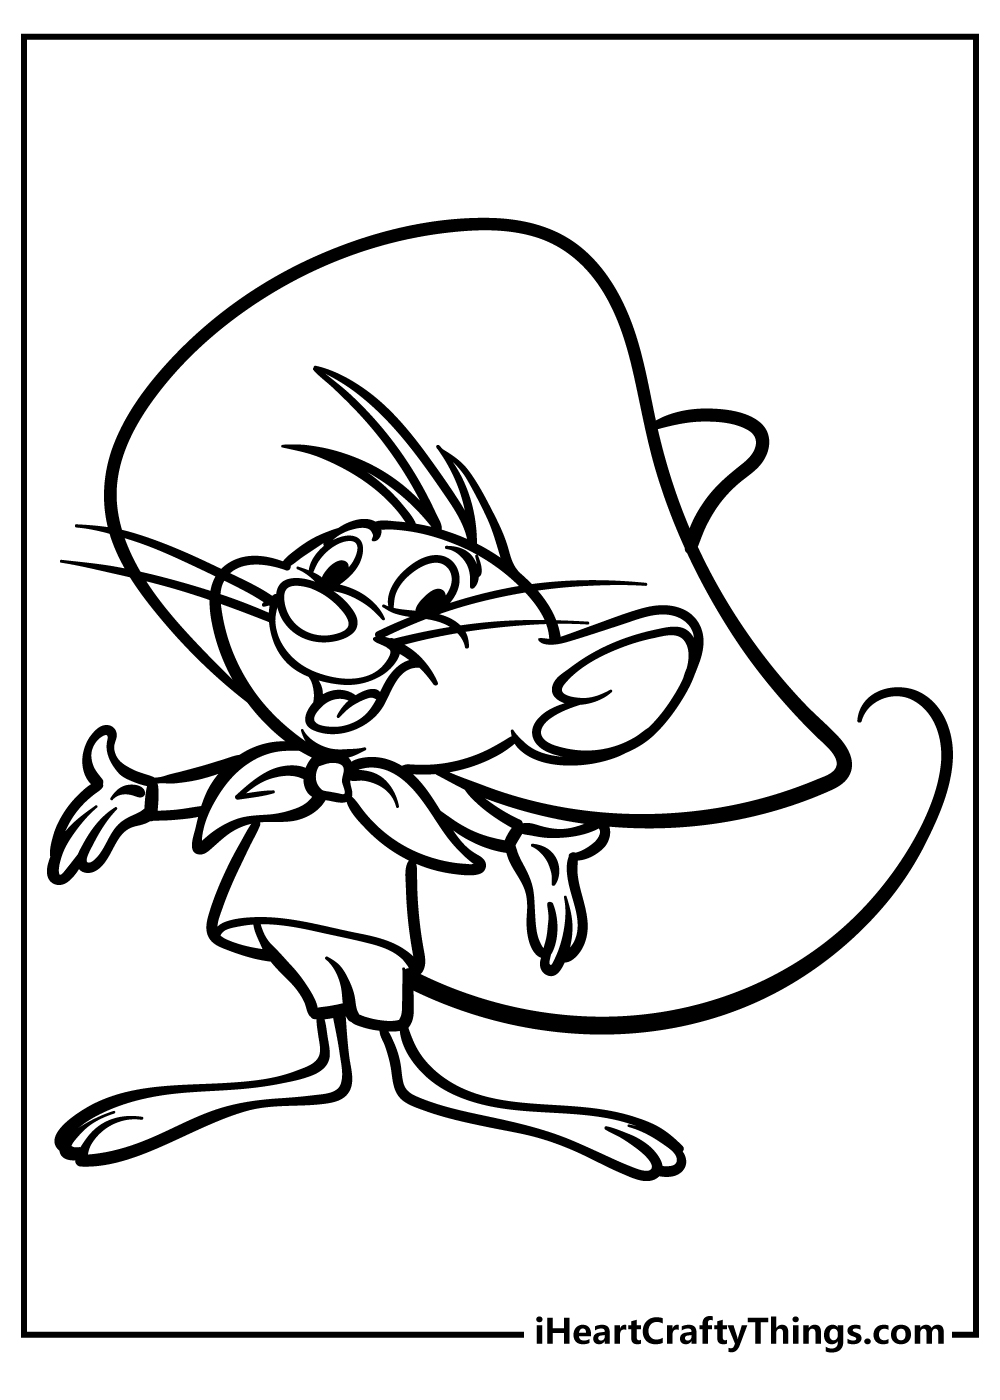 Looney Tunes Coloring Pages free pdf download